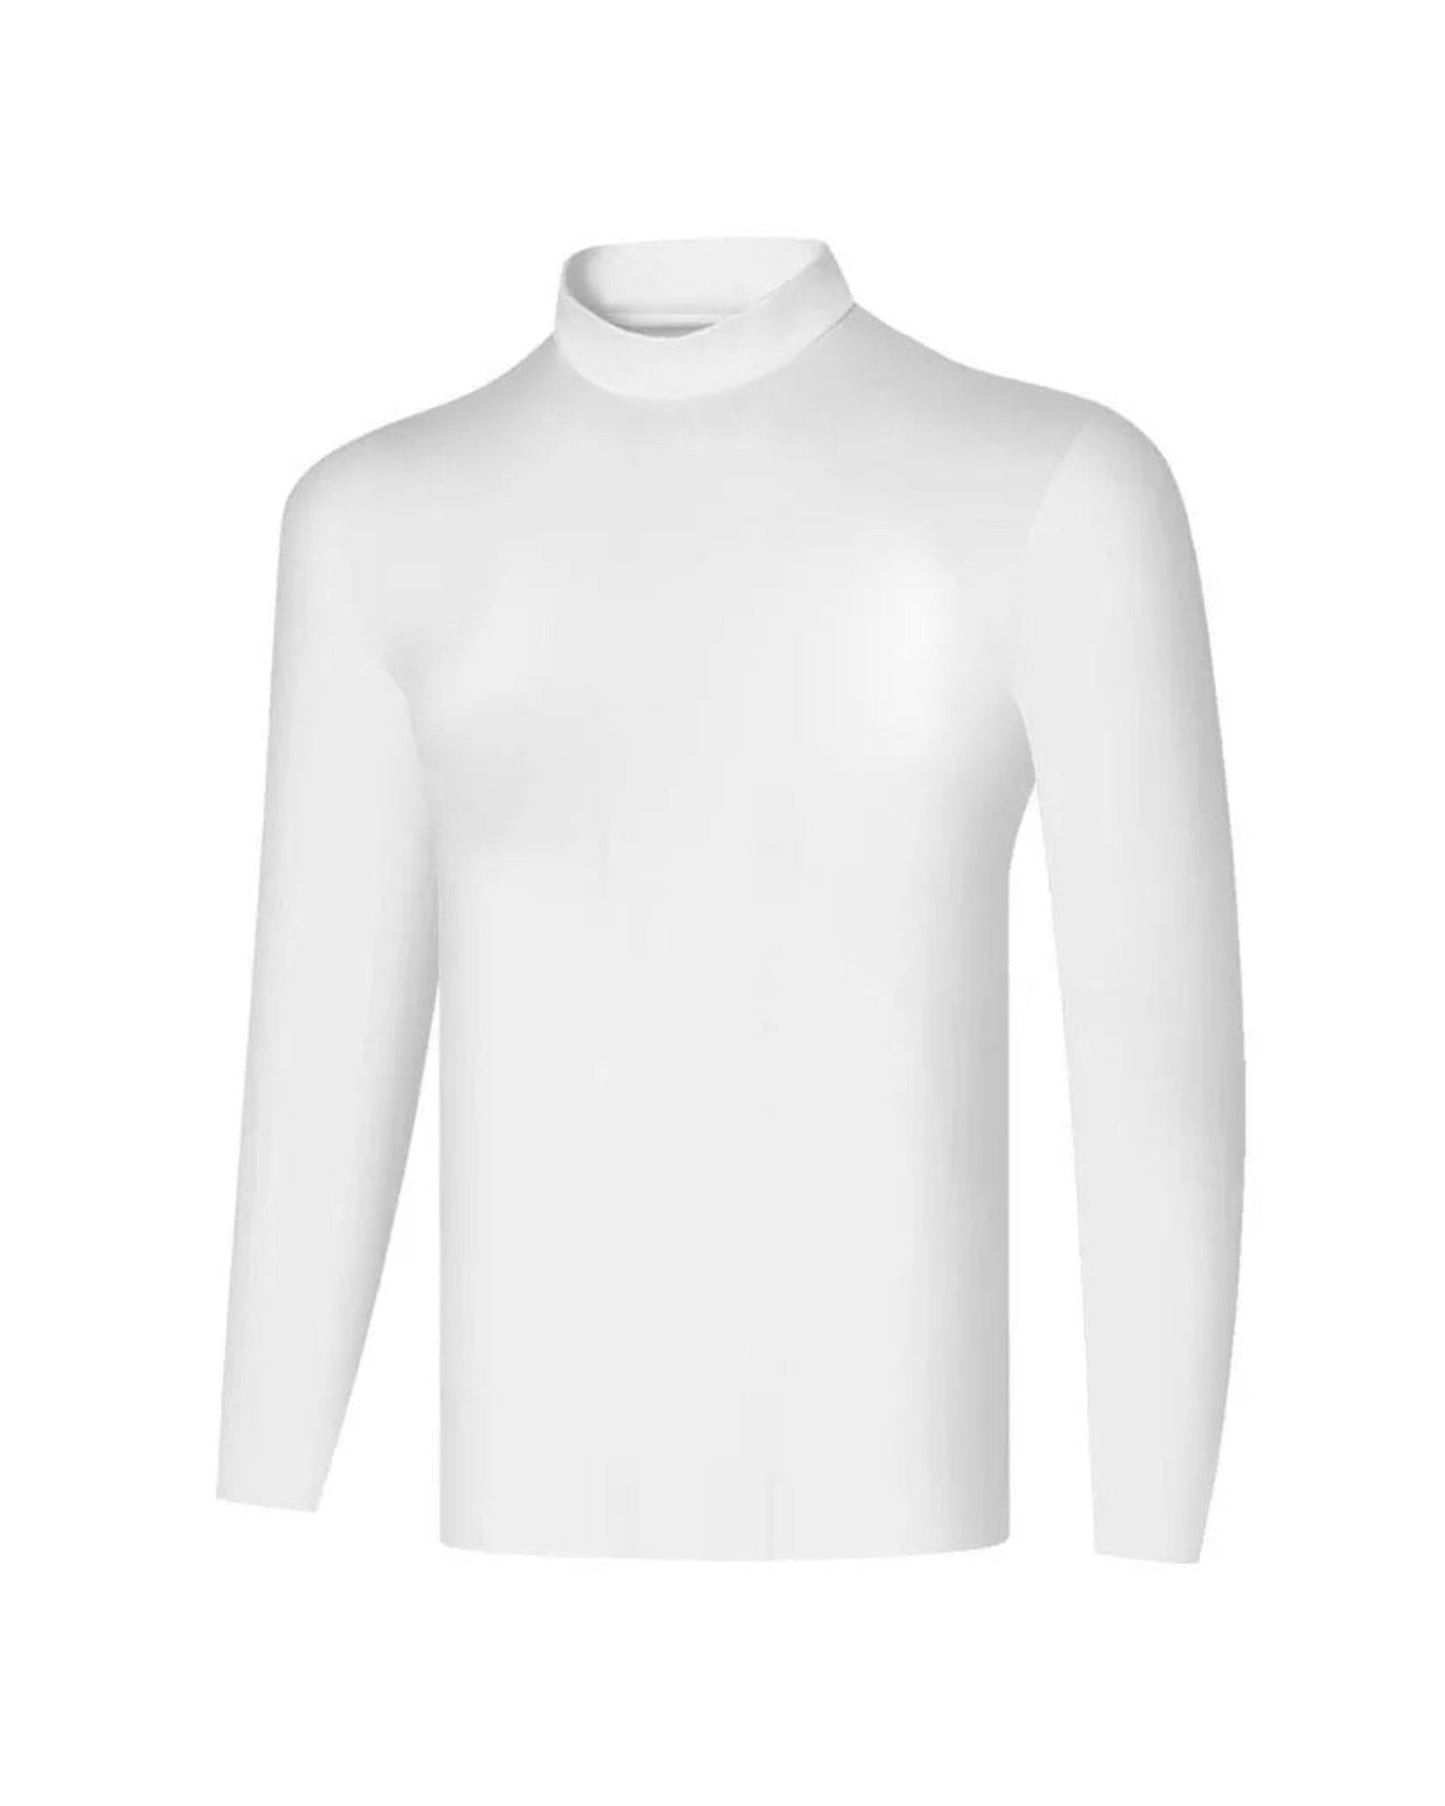 2H White High Neck Long Sleeve Sweater